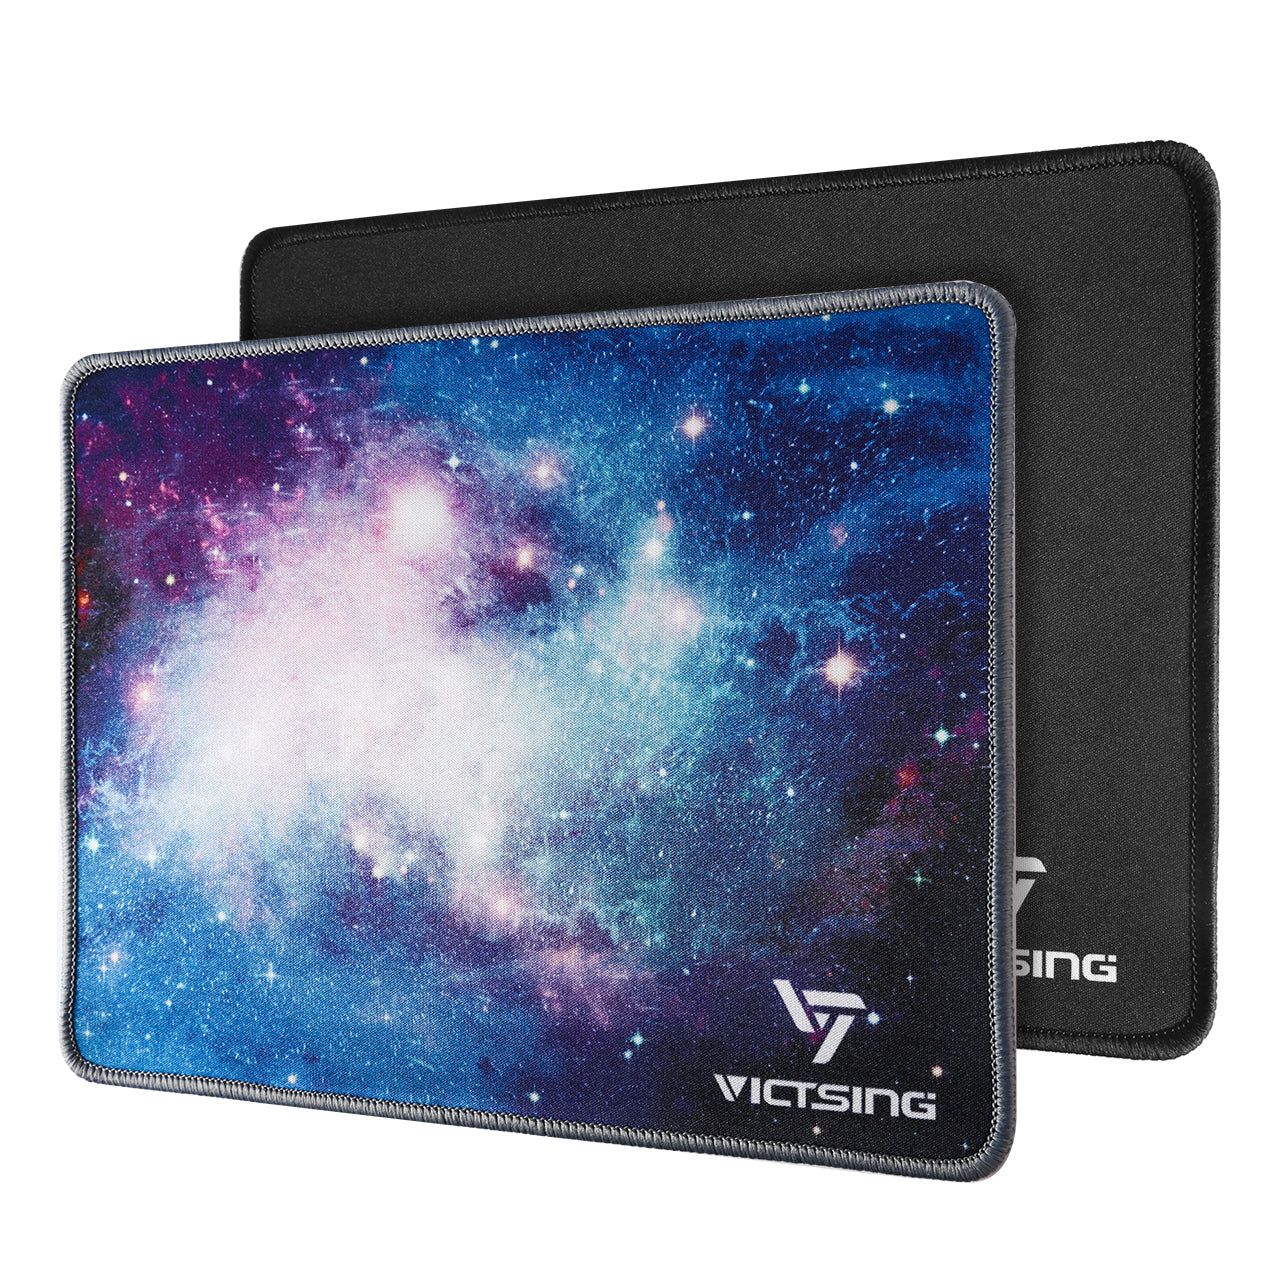 VictSing Mouse Pads [twin Pack]0.2×8.3×0.08 inches, Black+Blue-US07